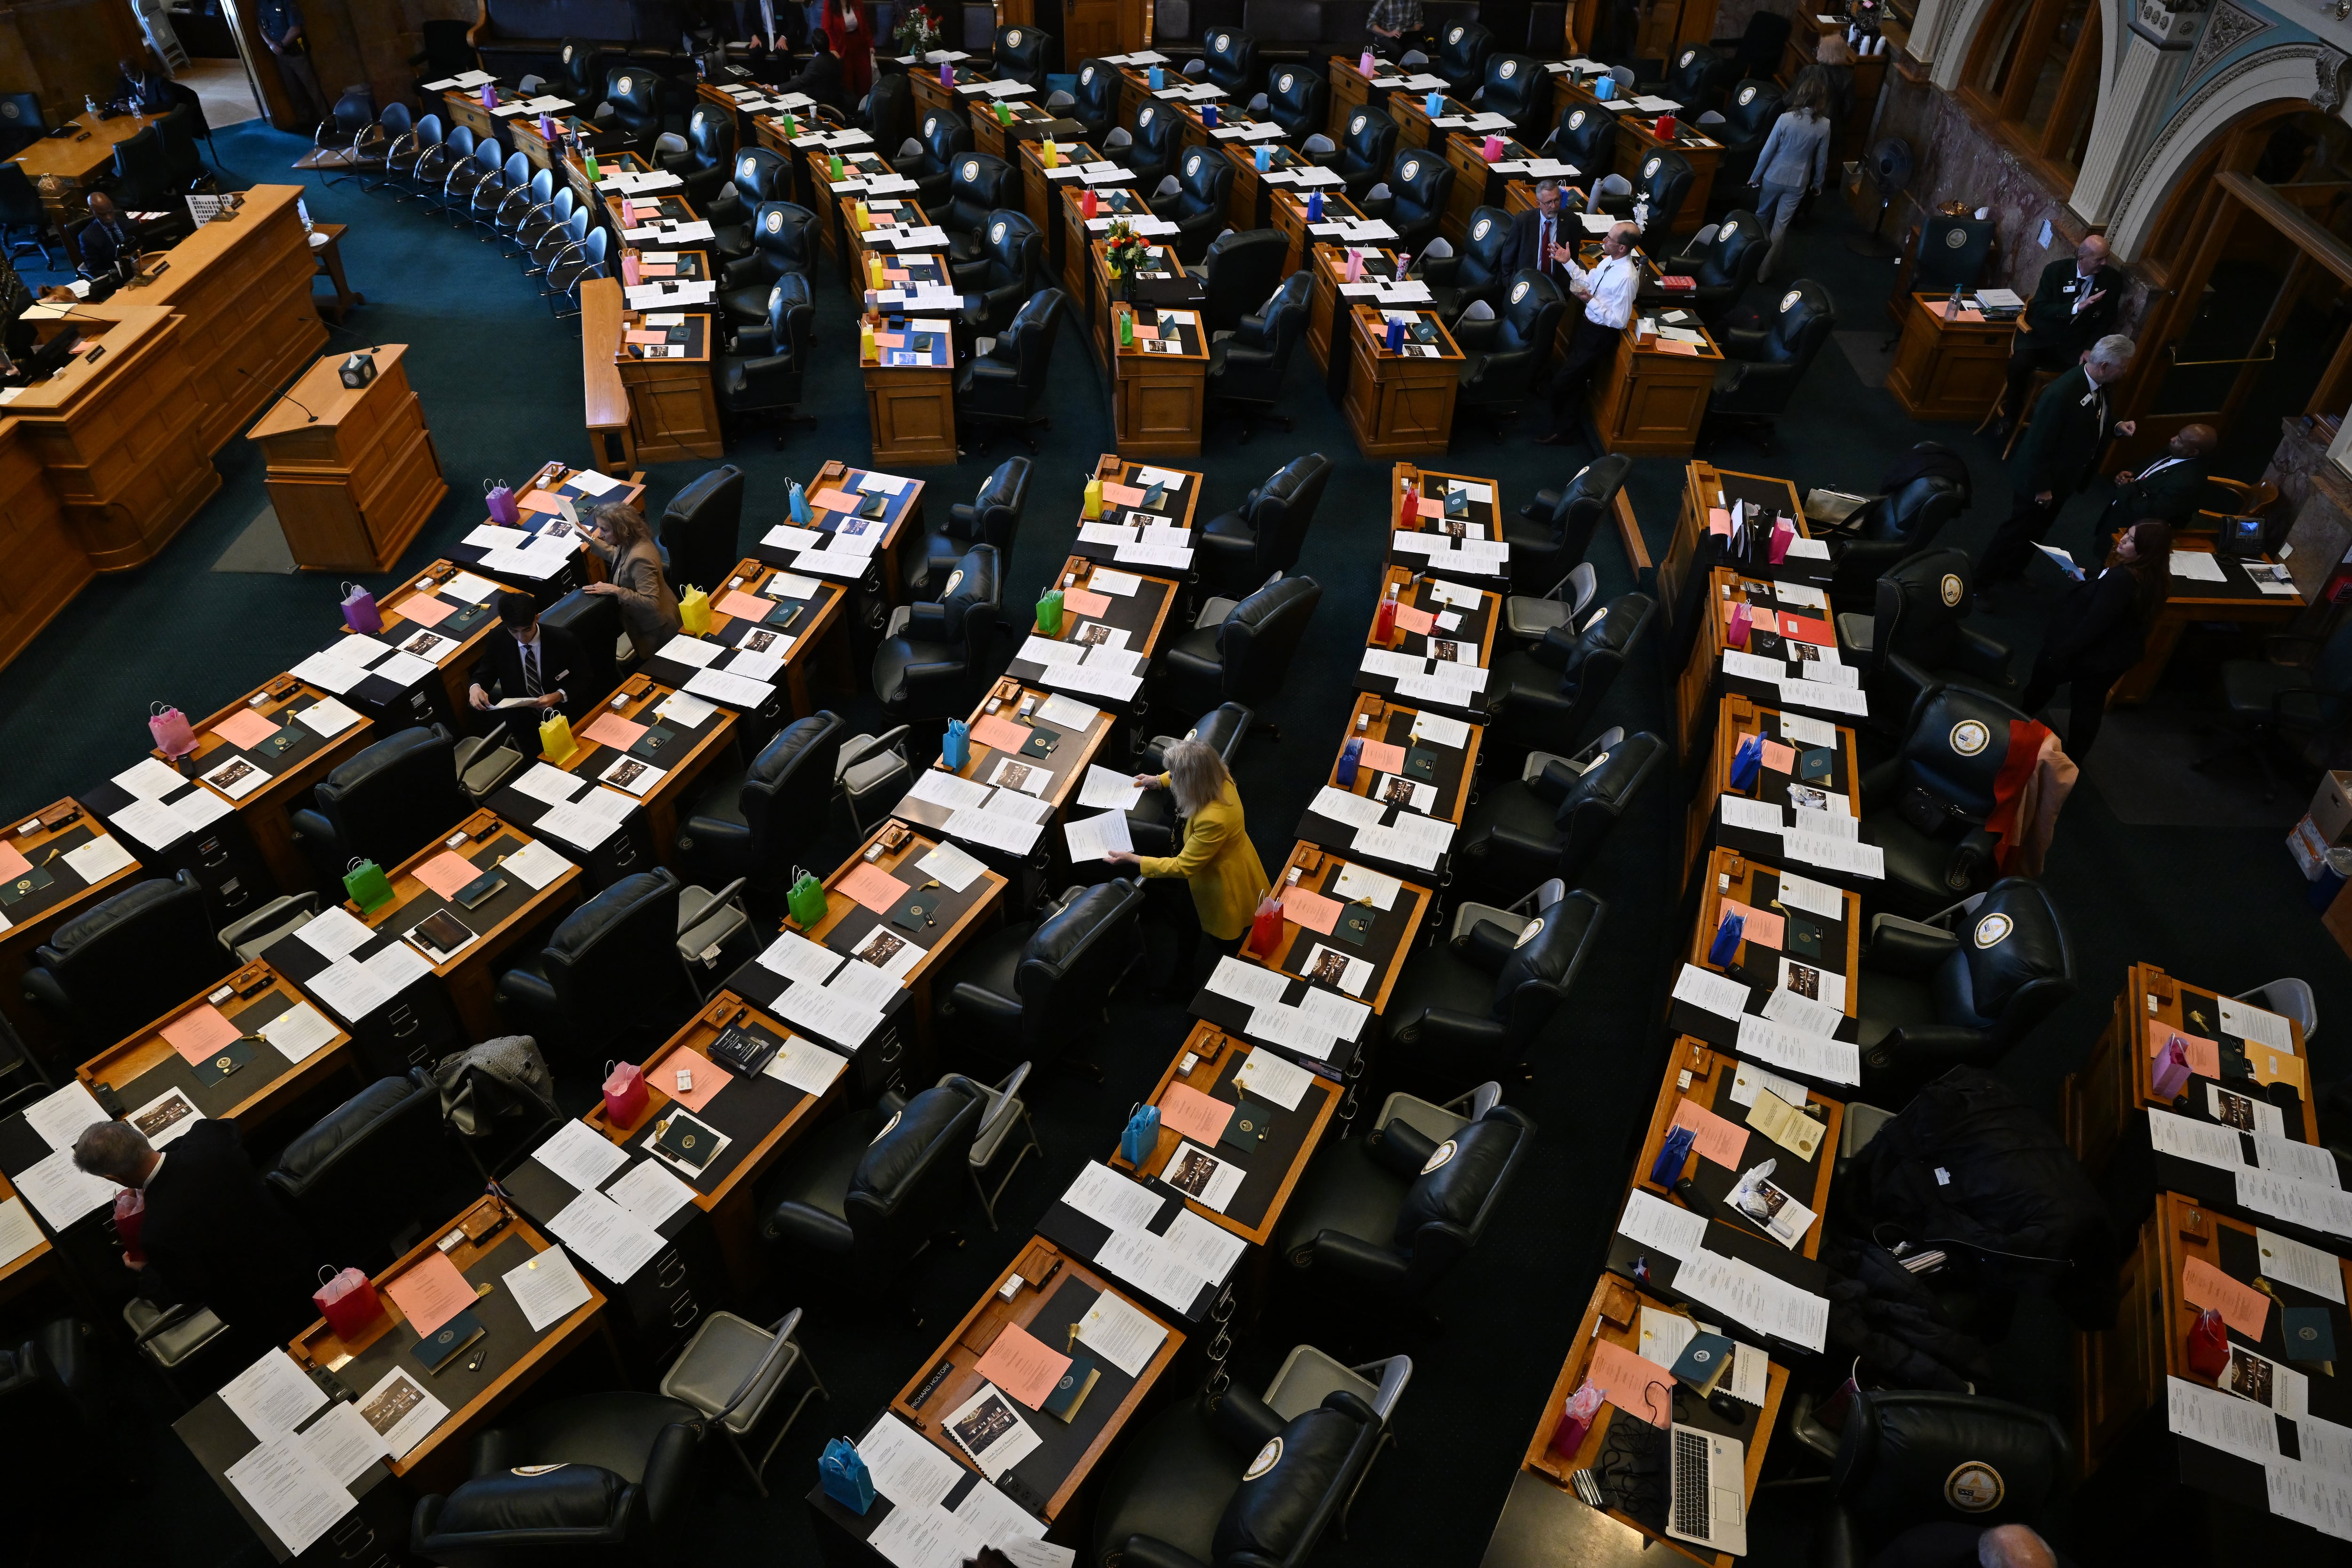 About a dozen people walk between the rows of desks in the Colorado House chambers in Denver, Colorado.